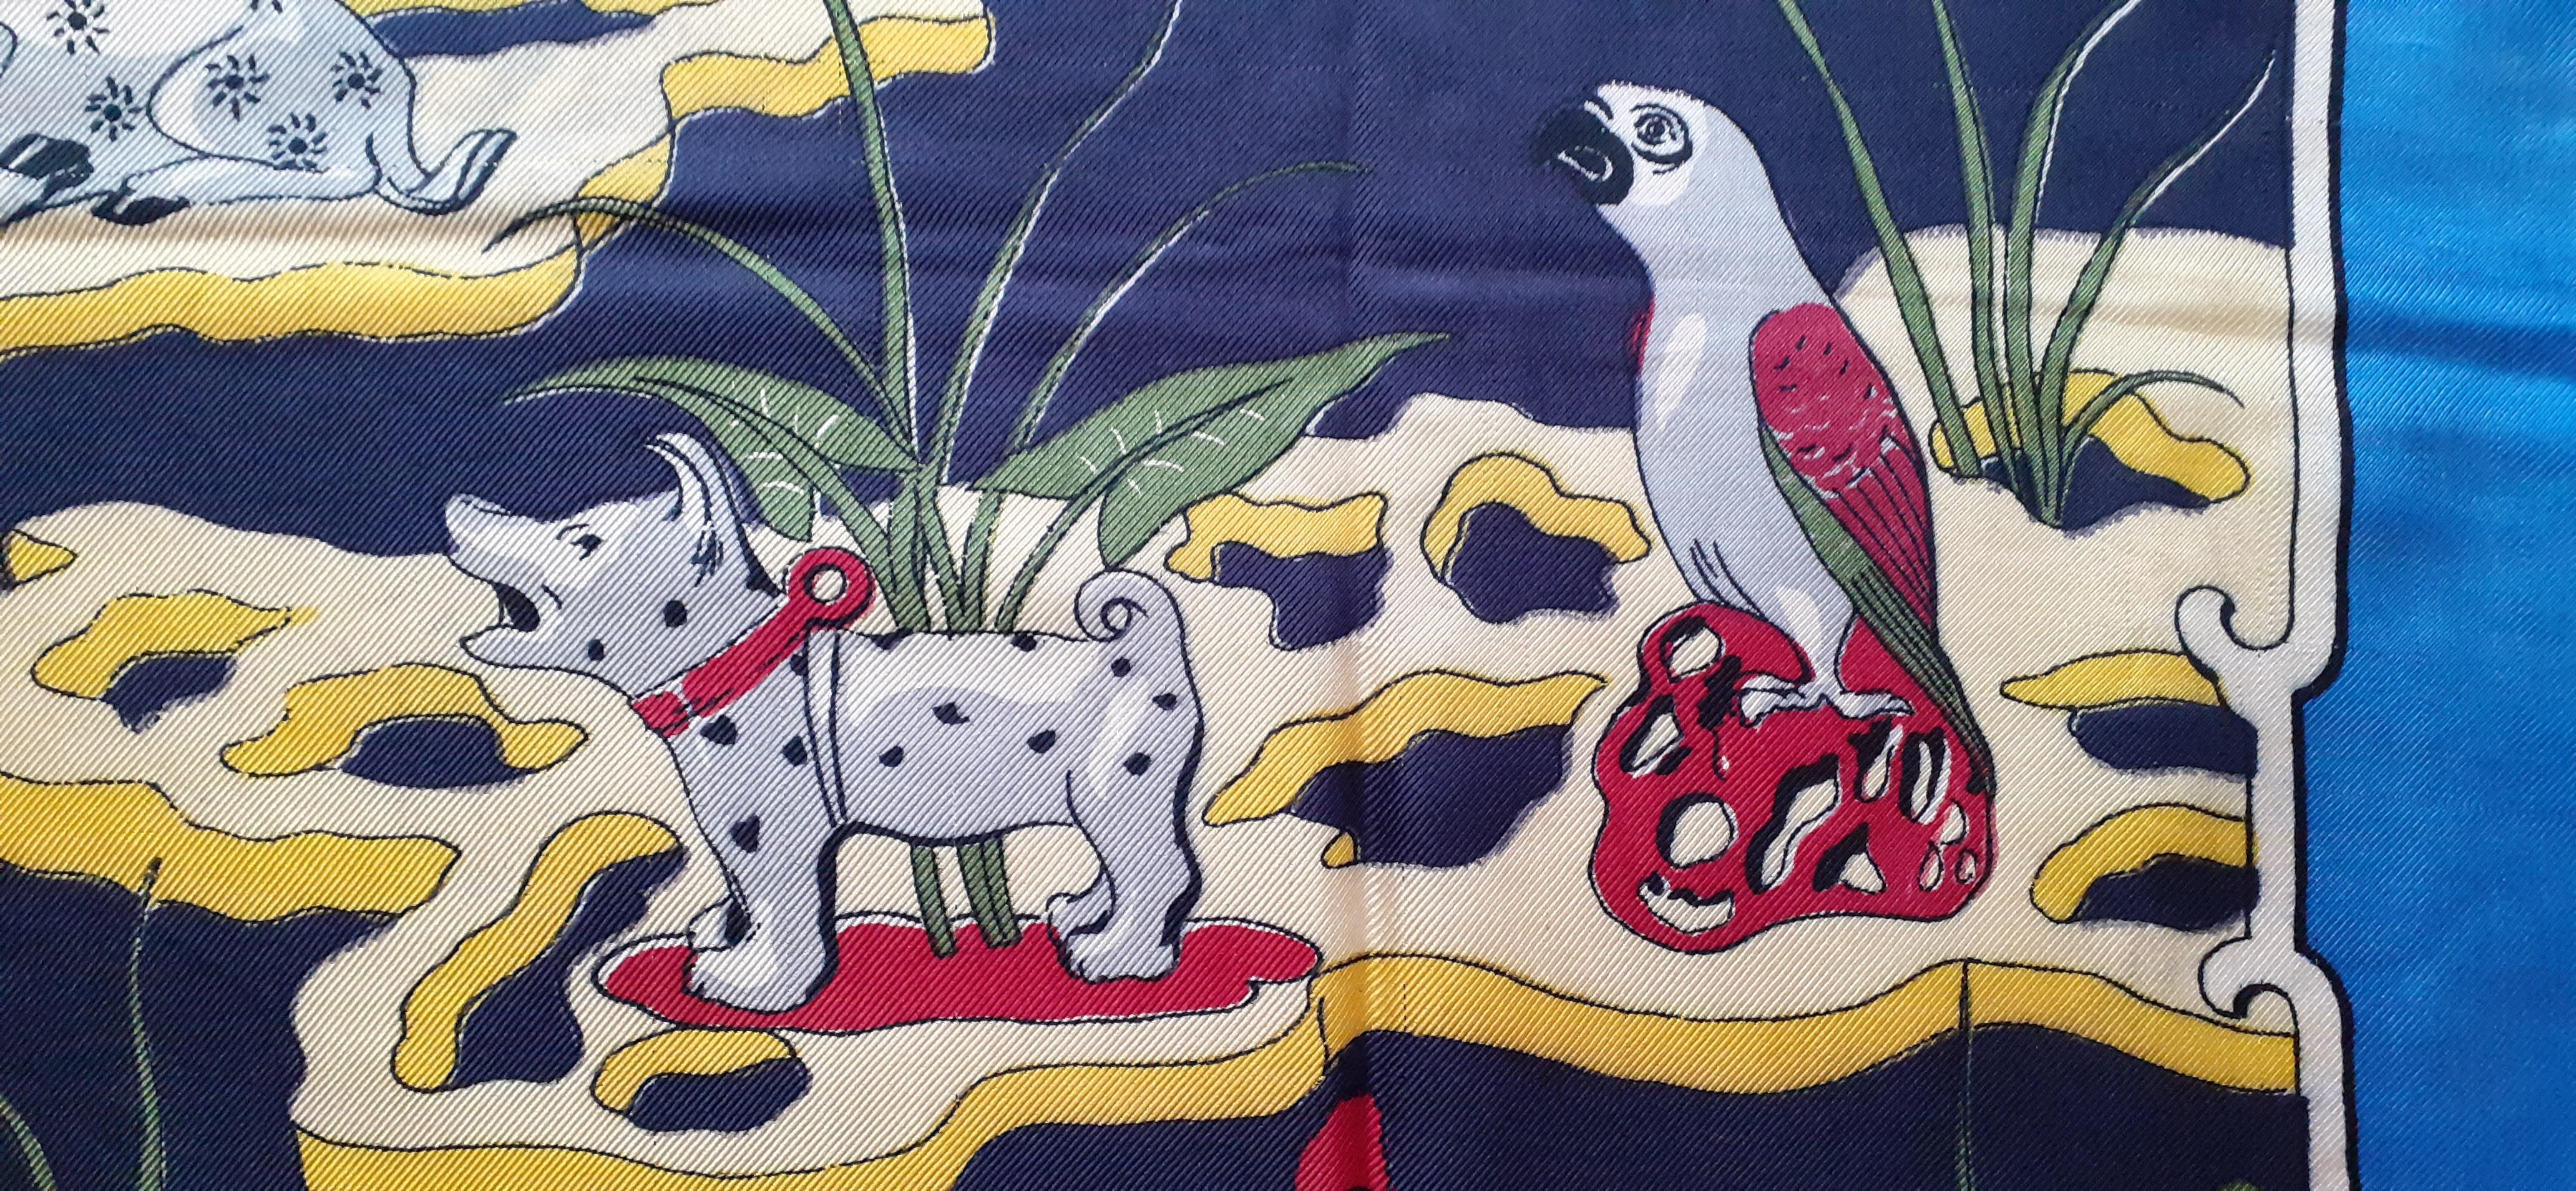 Exceptional Hermès Silk Scarf Faience Chinoise Chinese earthenware Pittner 1940 For Sale 6